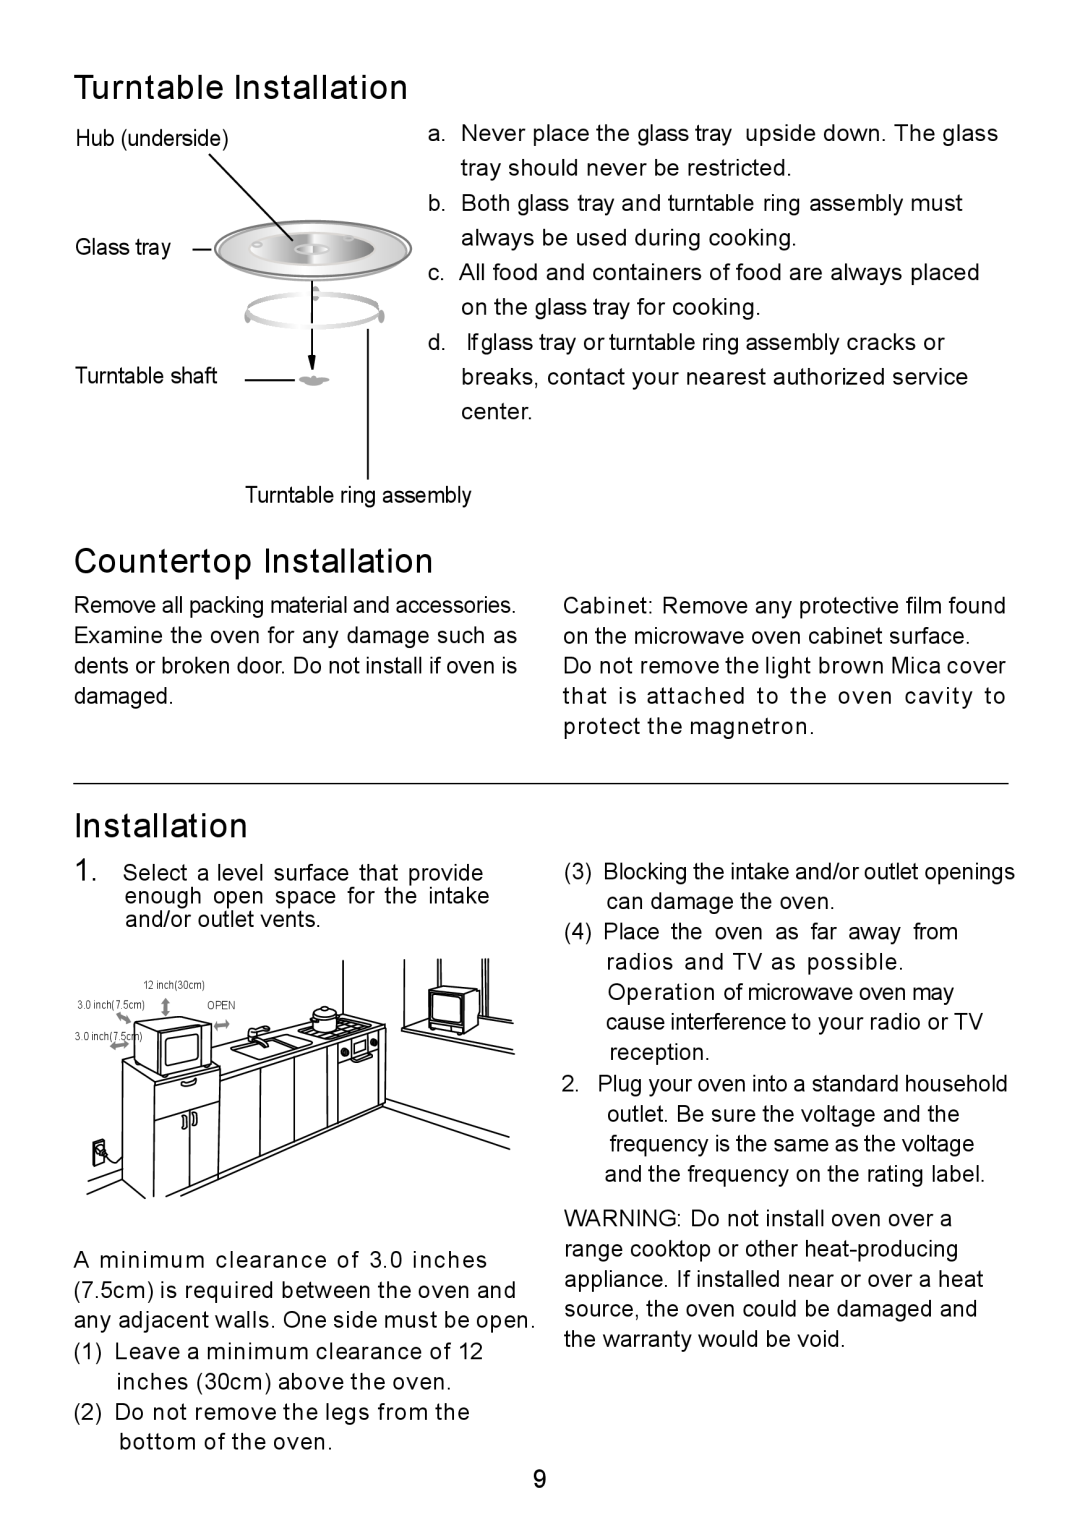 RCA RMW713-WHITE instruction manual Turntable Installation, Countertop Installation 